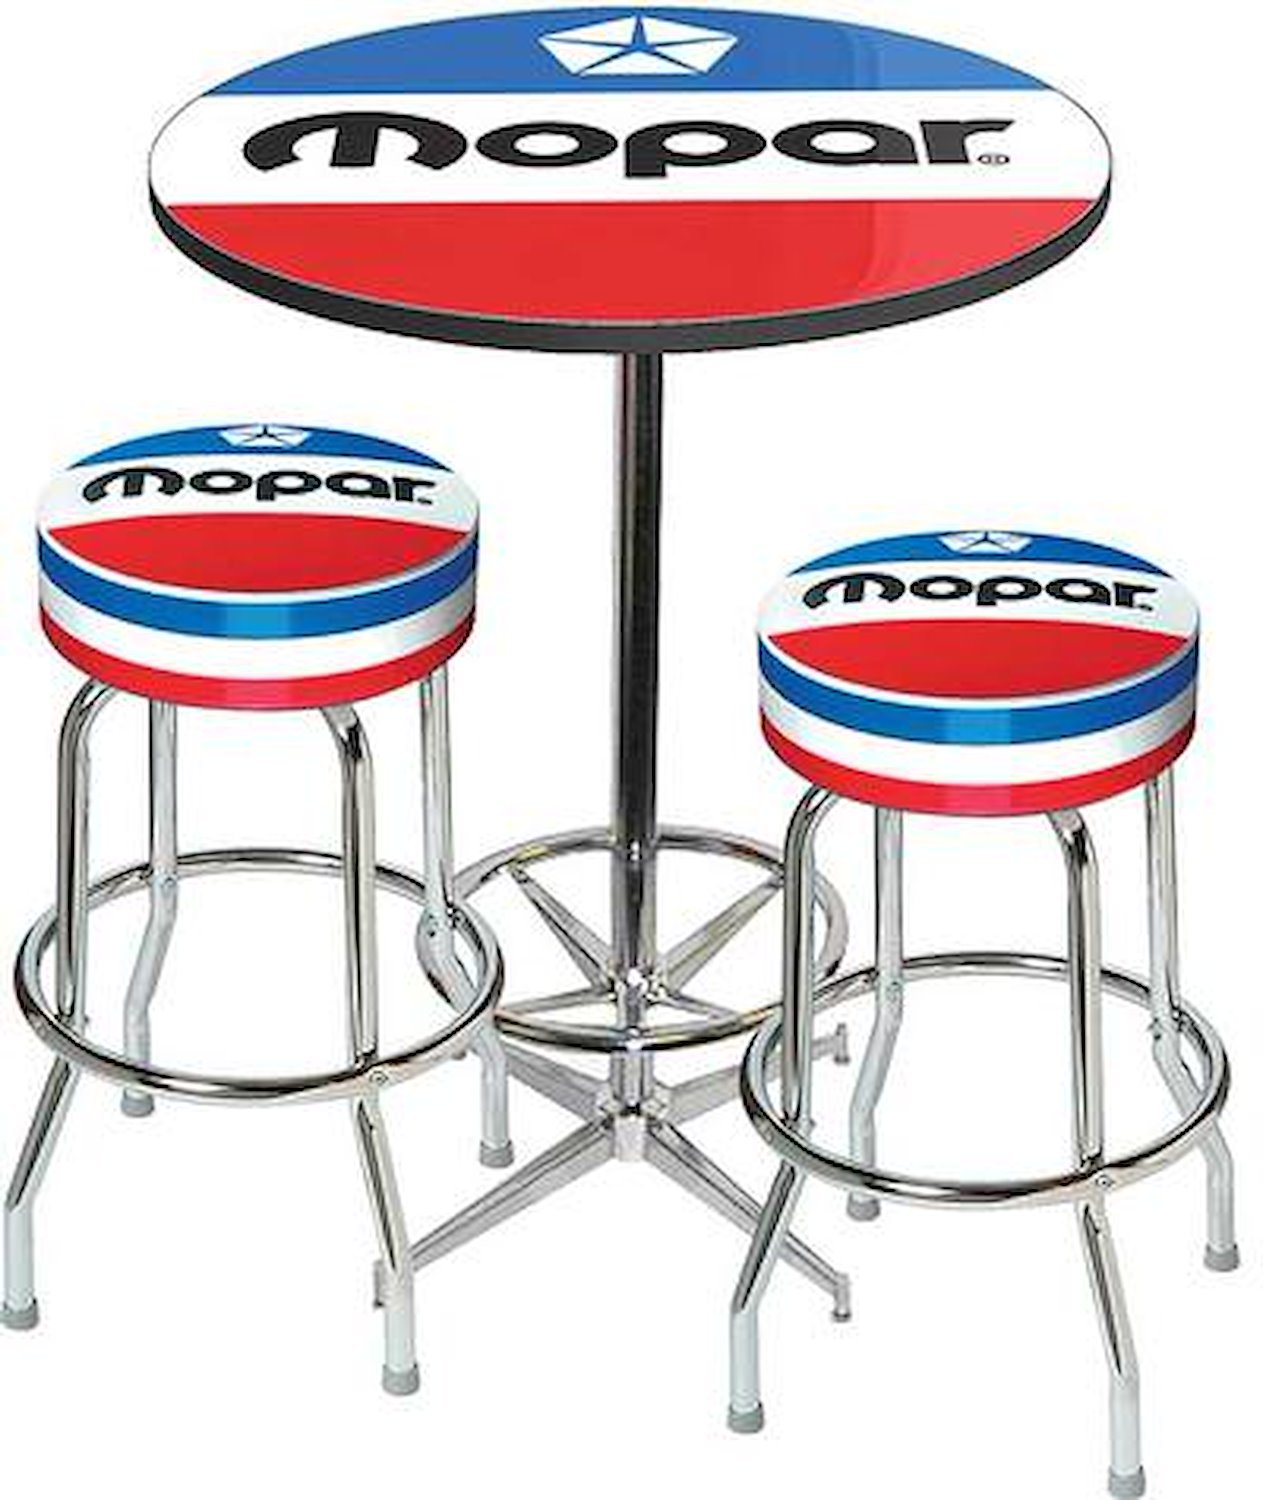 MD67707 Pub Table & Stool Set Mopar Logo; Chrome Based Table With Foot Rest & 2 Chrome Stools; Style 7